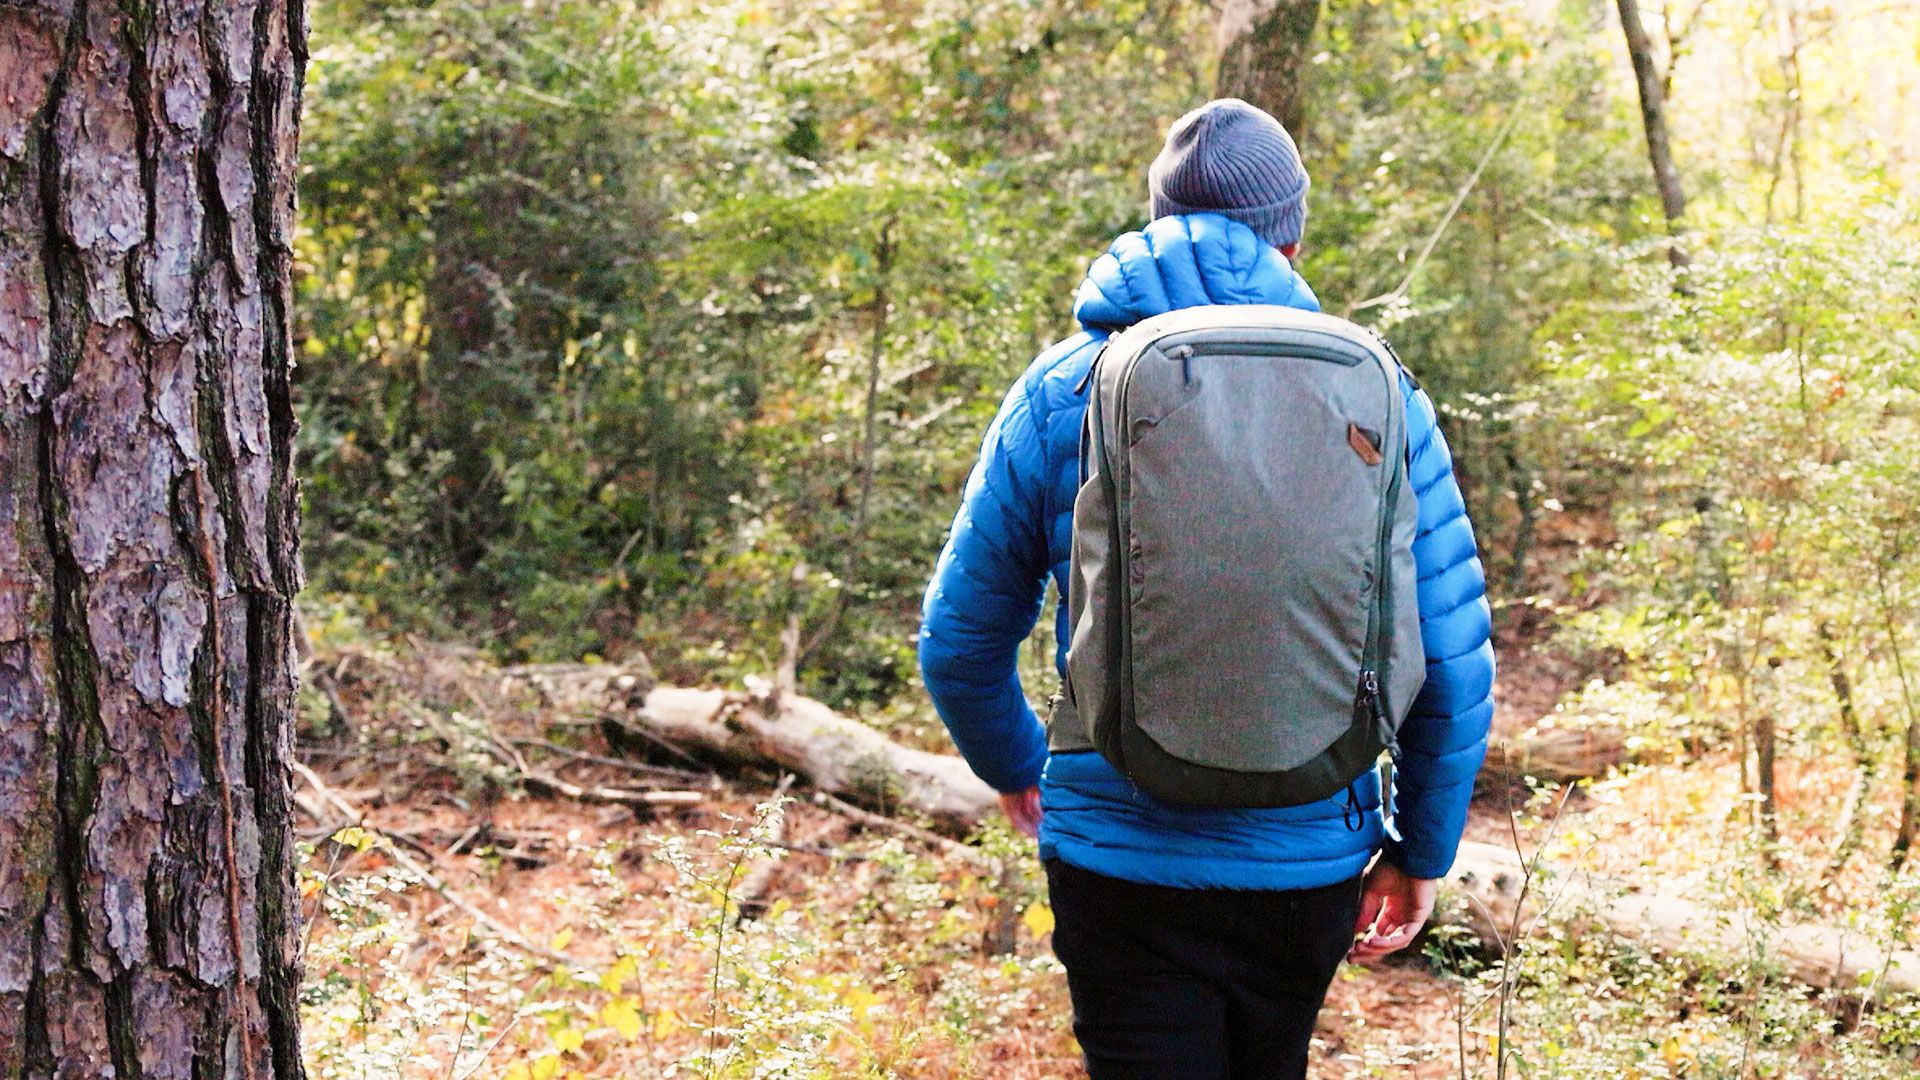 Hiking with the Peak Design 45L Travel Backpack